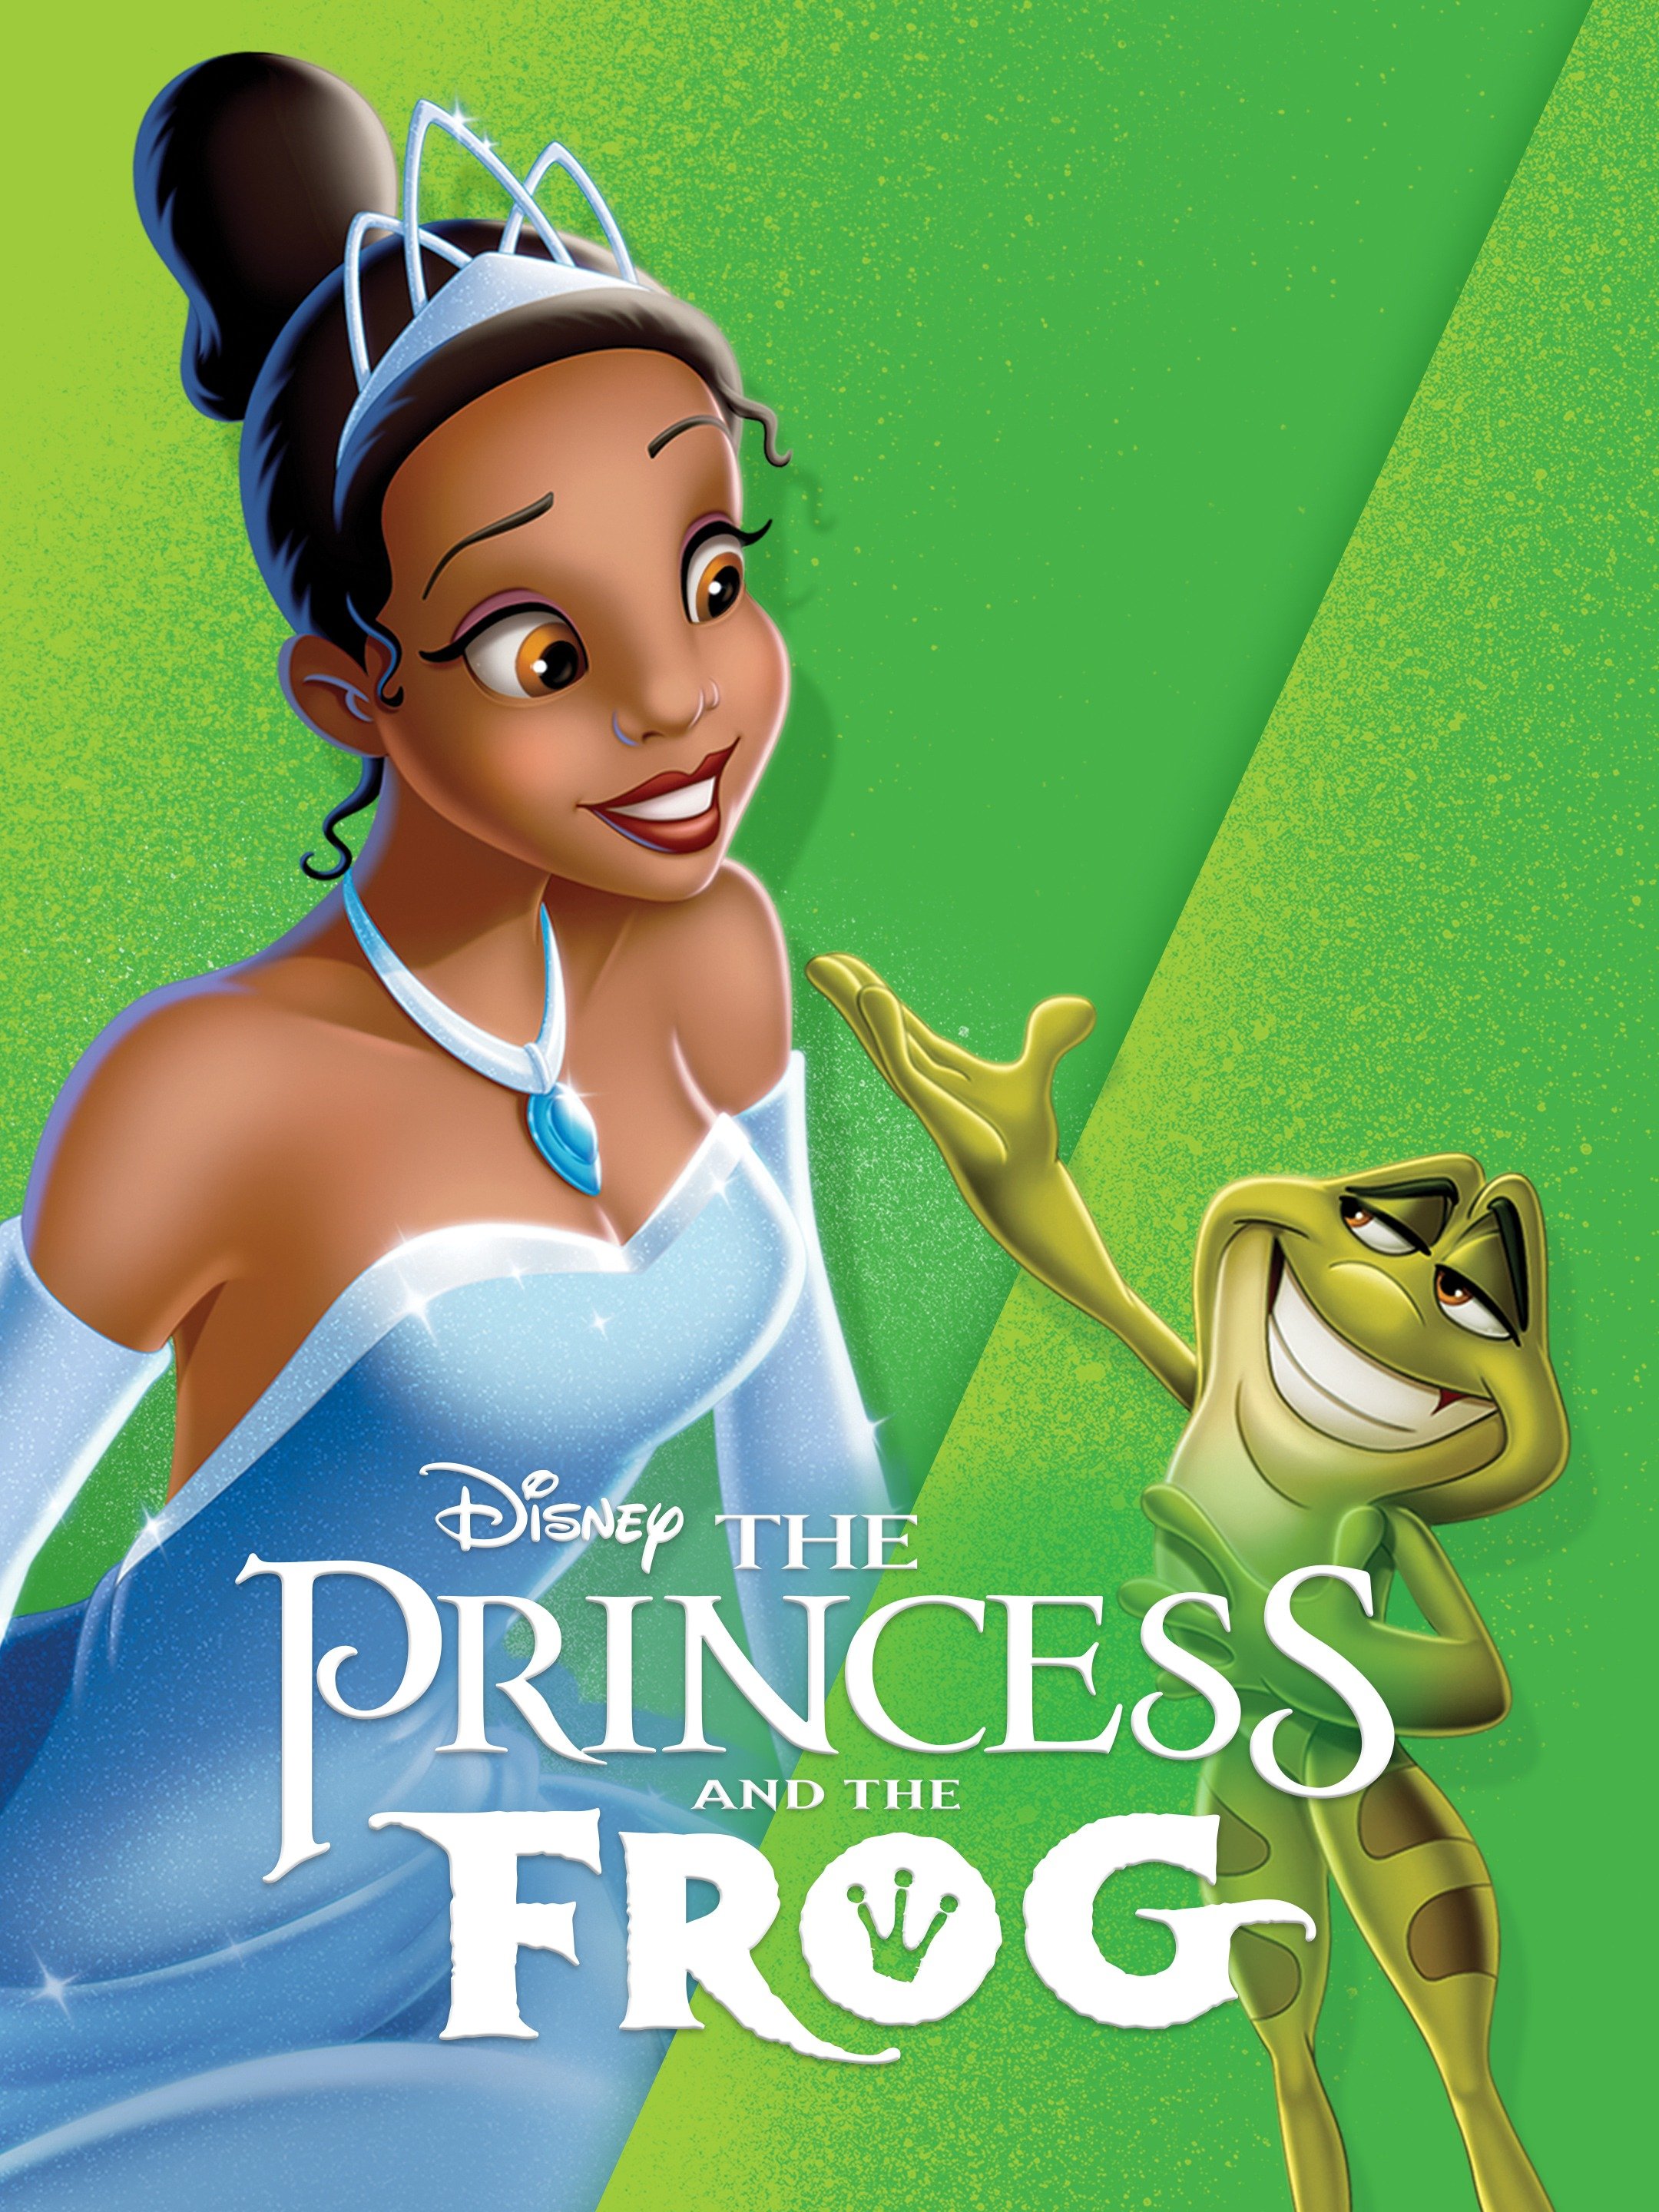 The Princess And The Frog 2009 Rotten Tomatoes